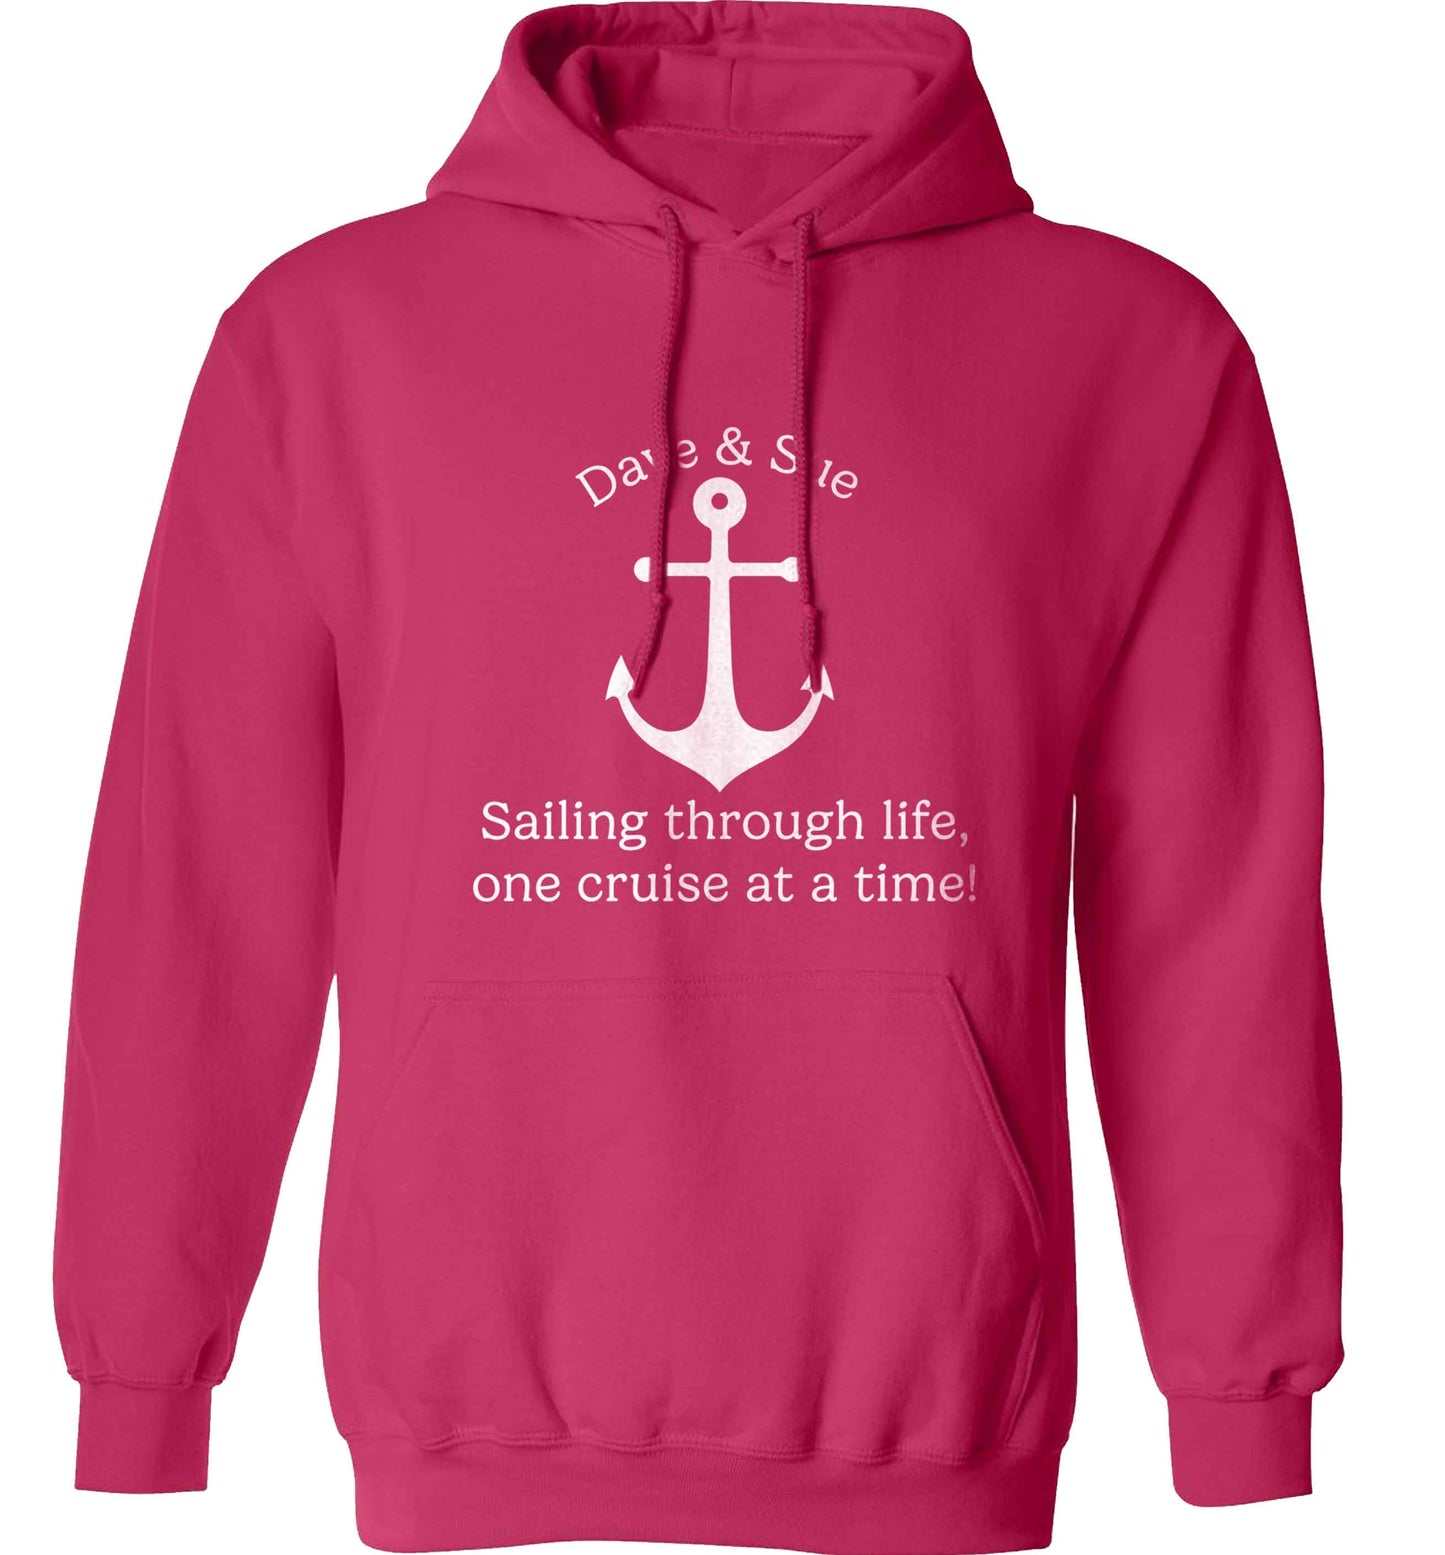 Sailing through life one cruise at a time - personalised adults unisex pink hoodie 2XL